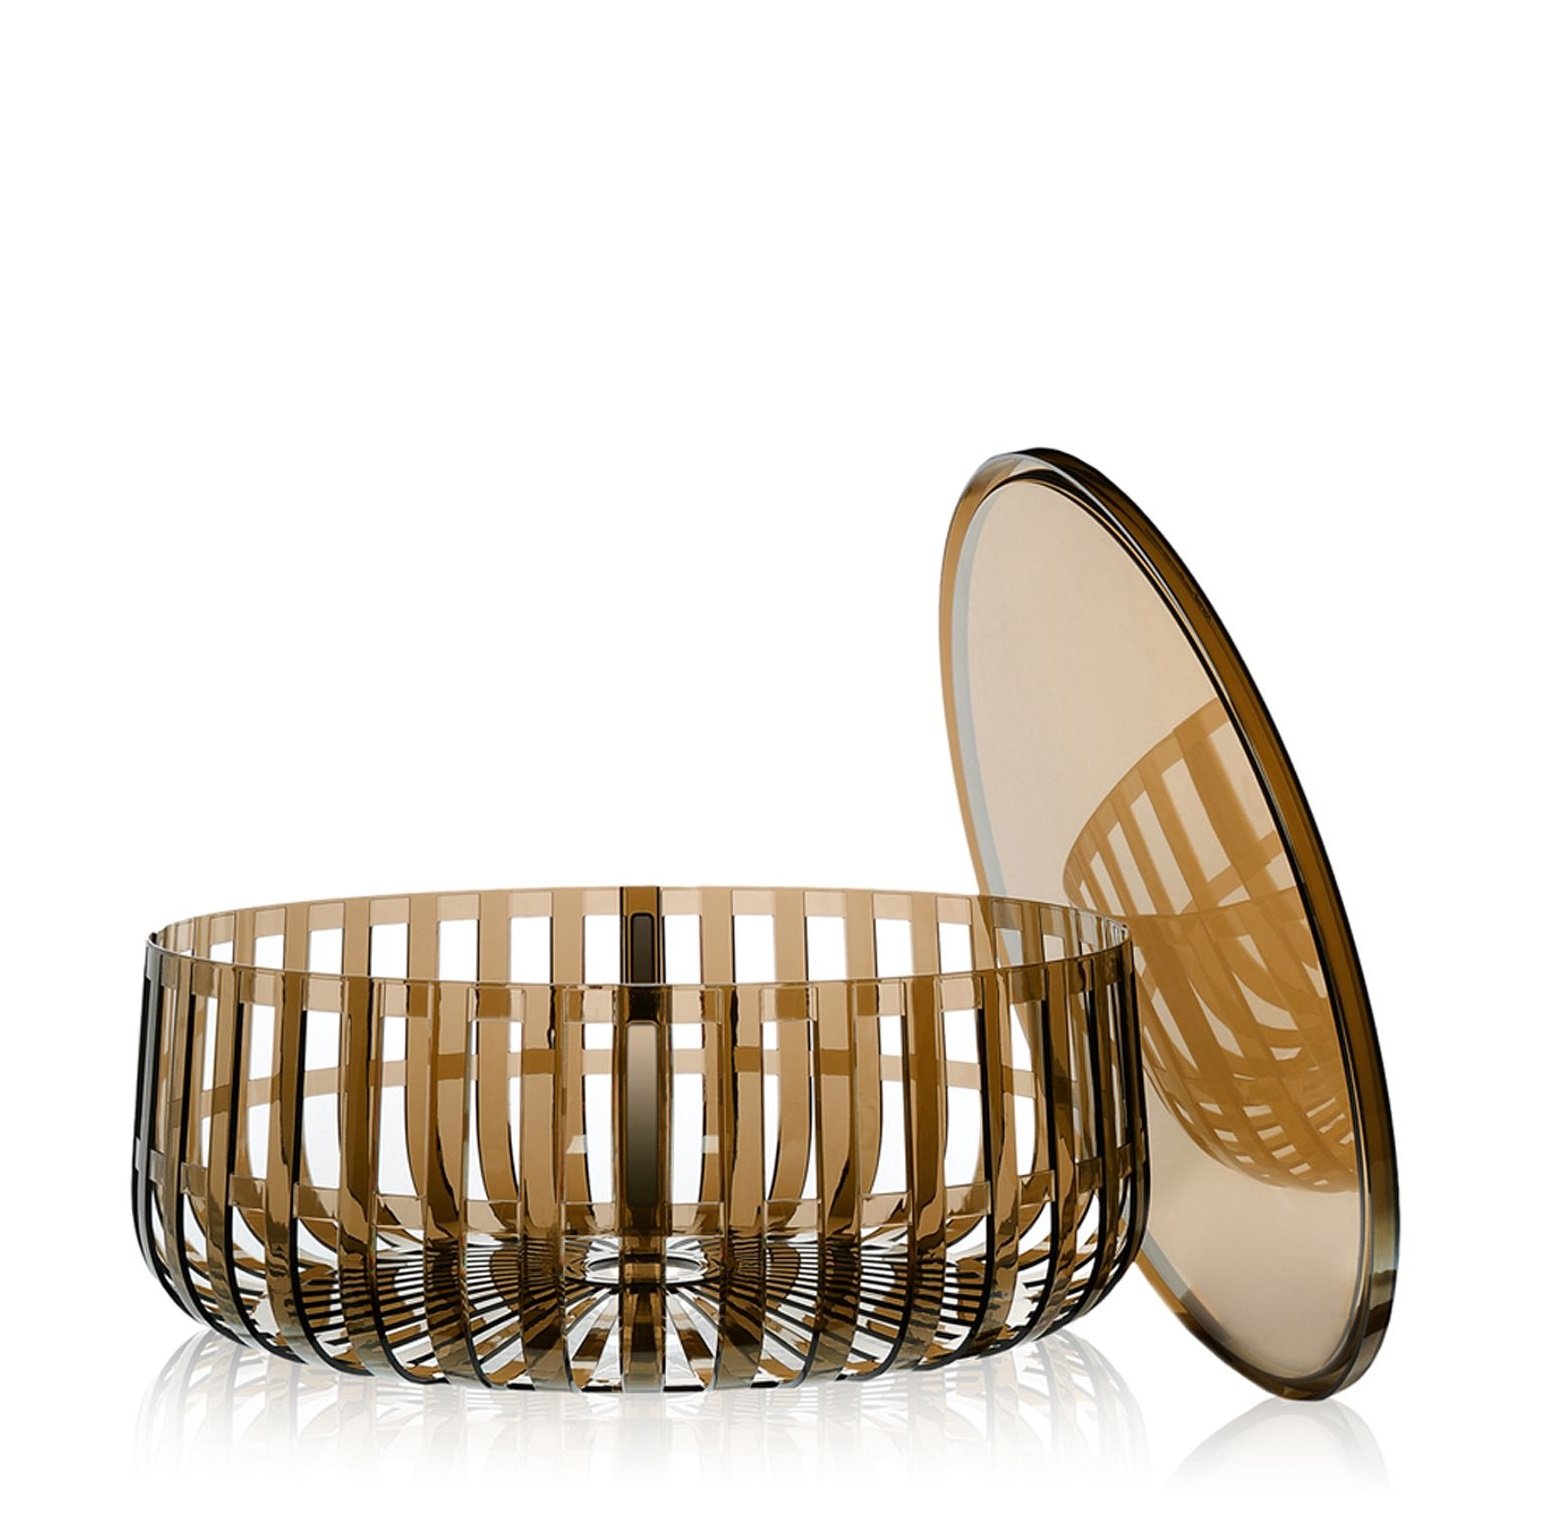 Panier Coffee Table from Kartell, designed by Ronan and Erwan Bouroullec